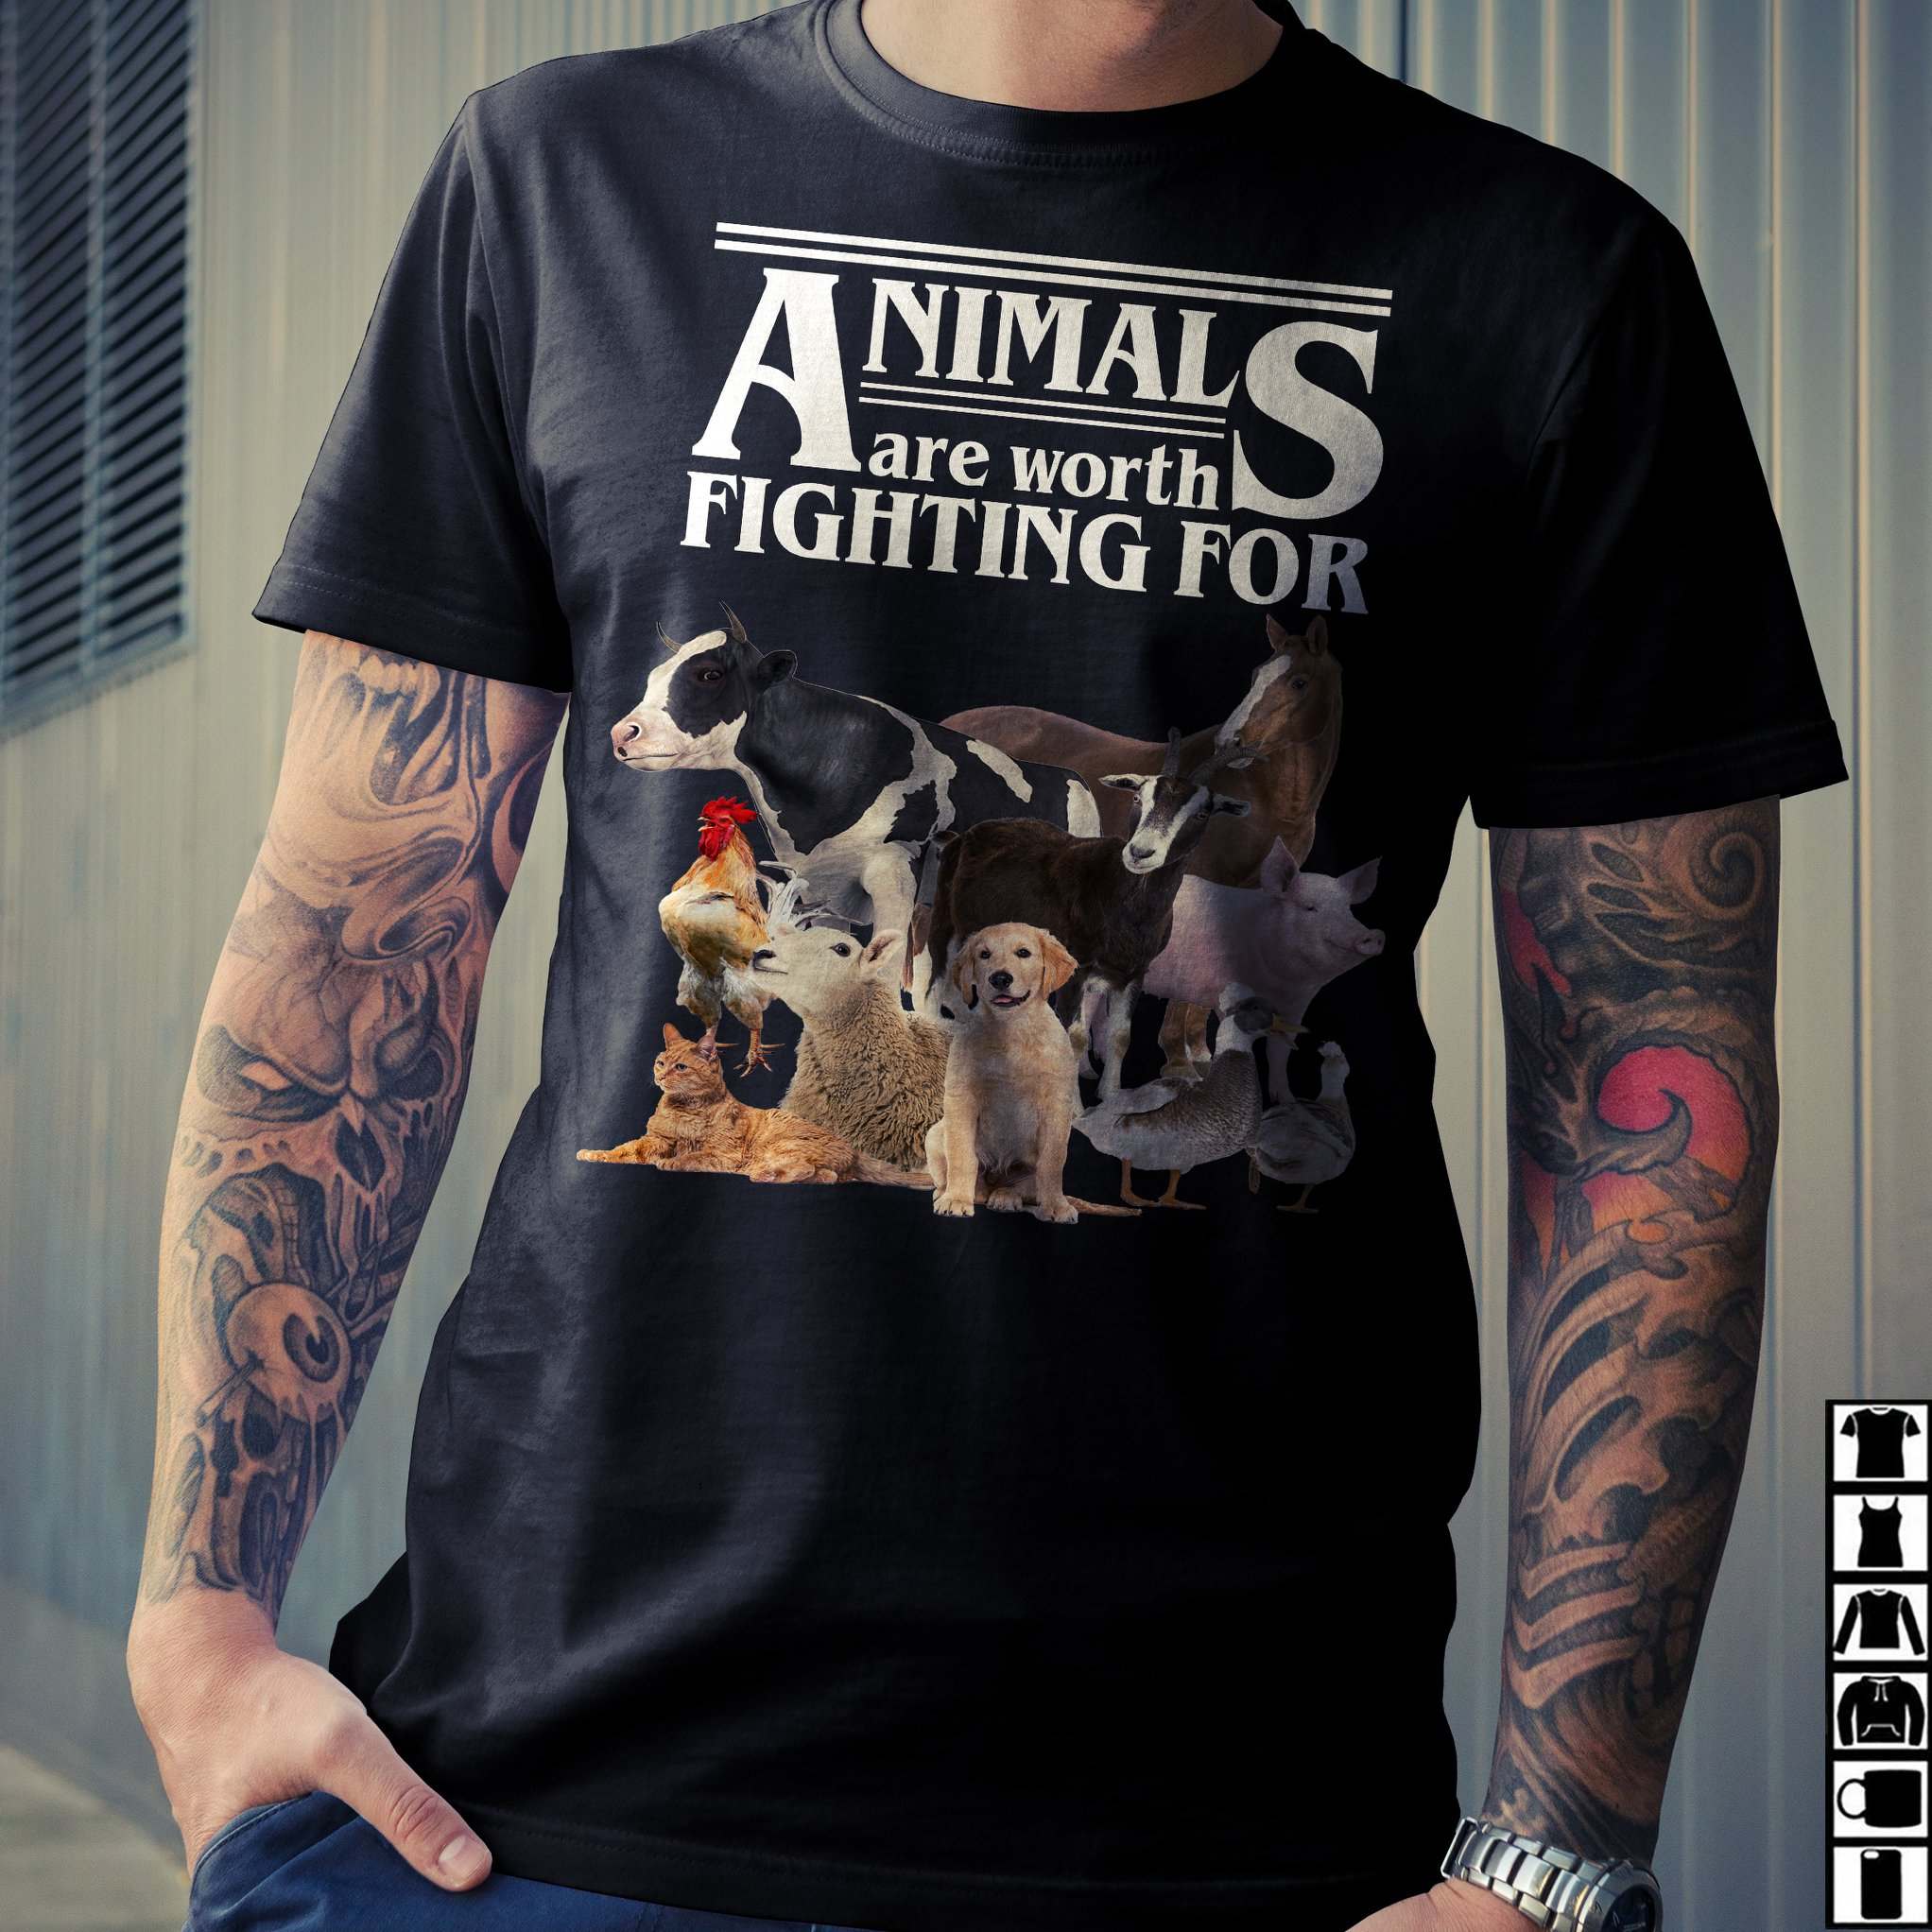 Animals are worth fighting for - Animal lover